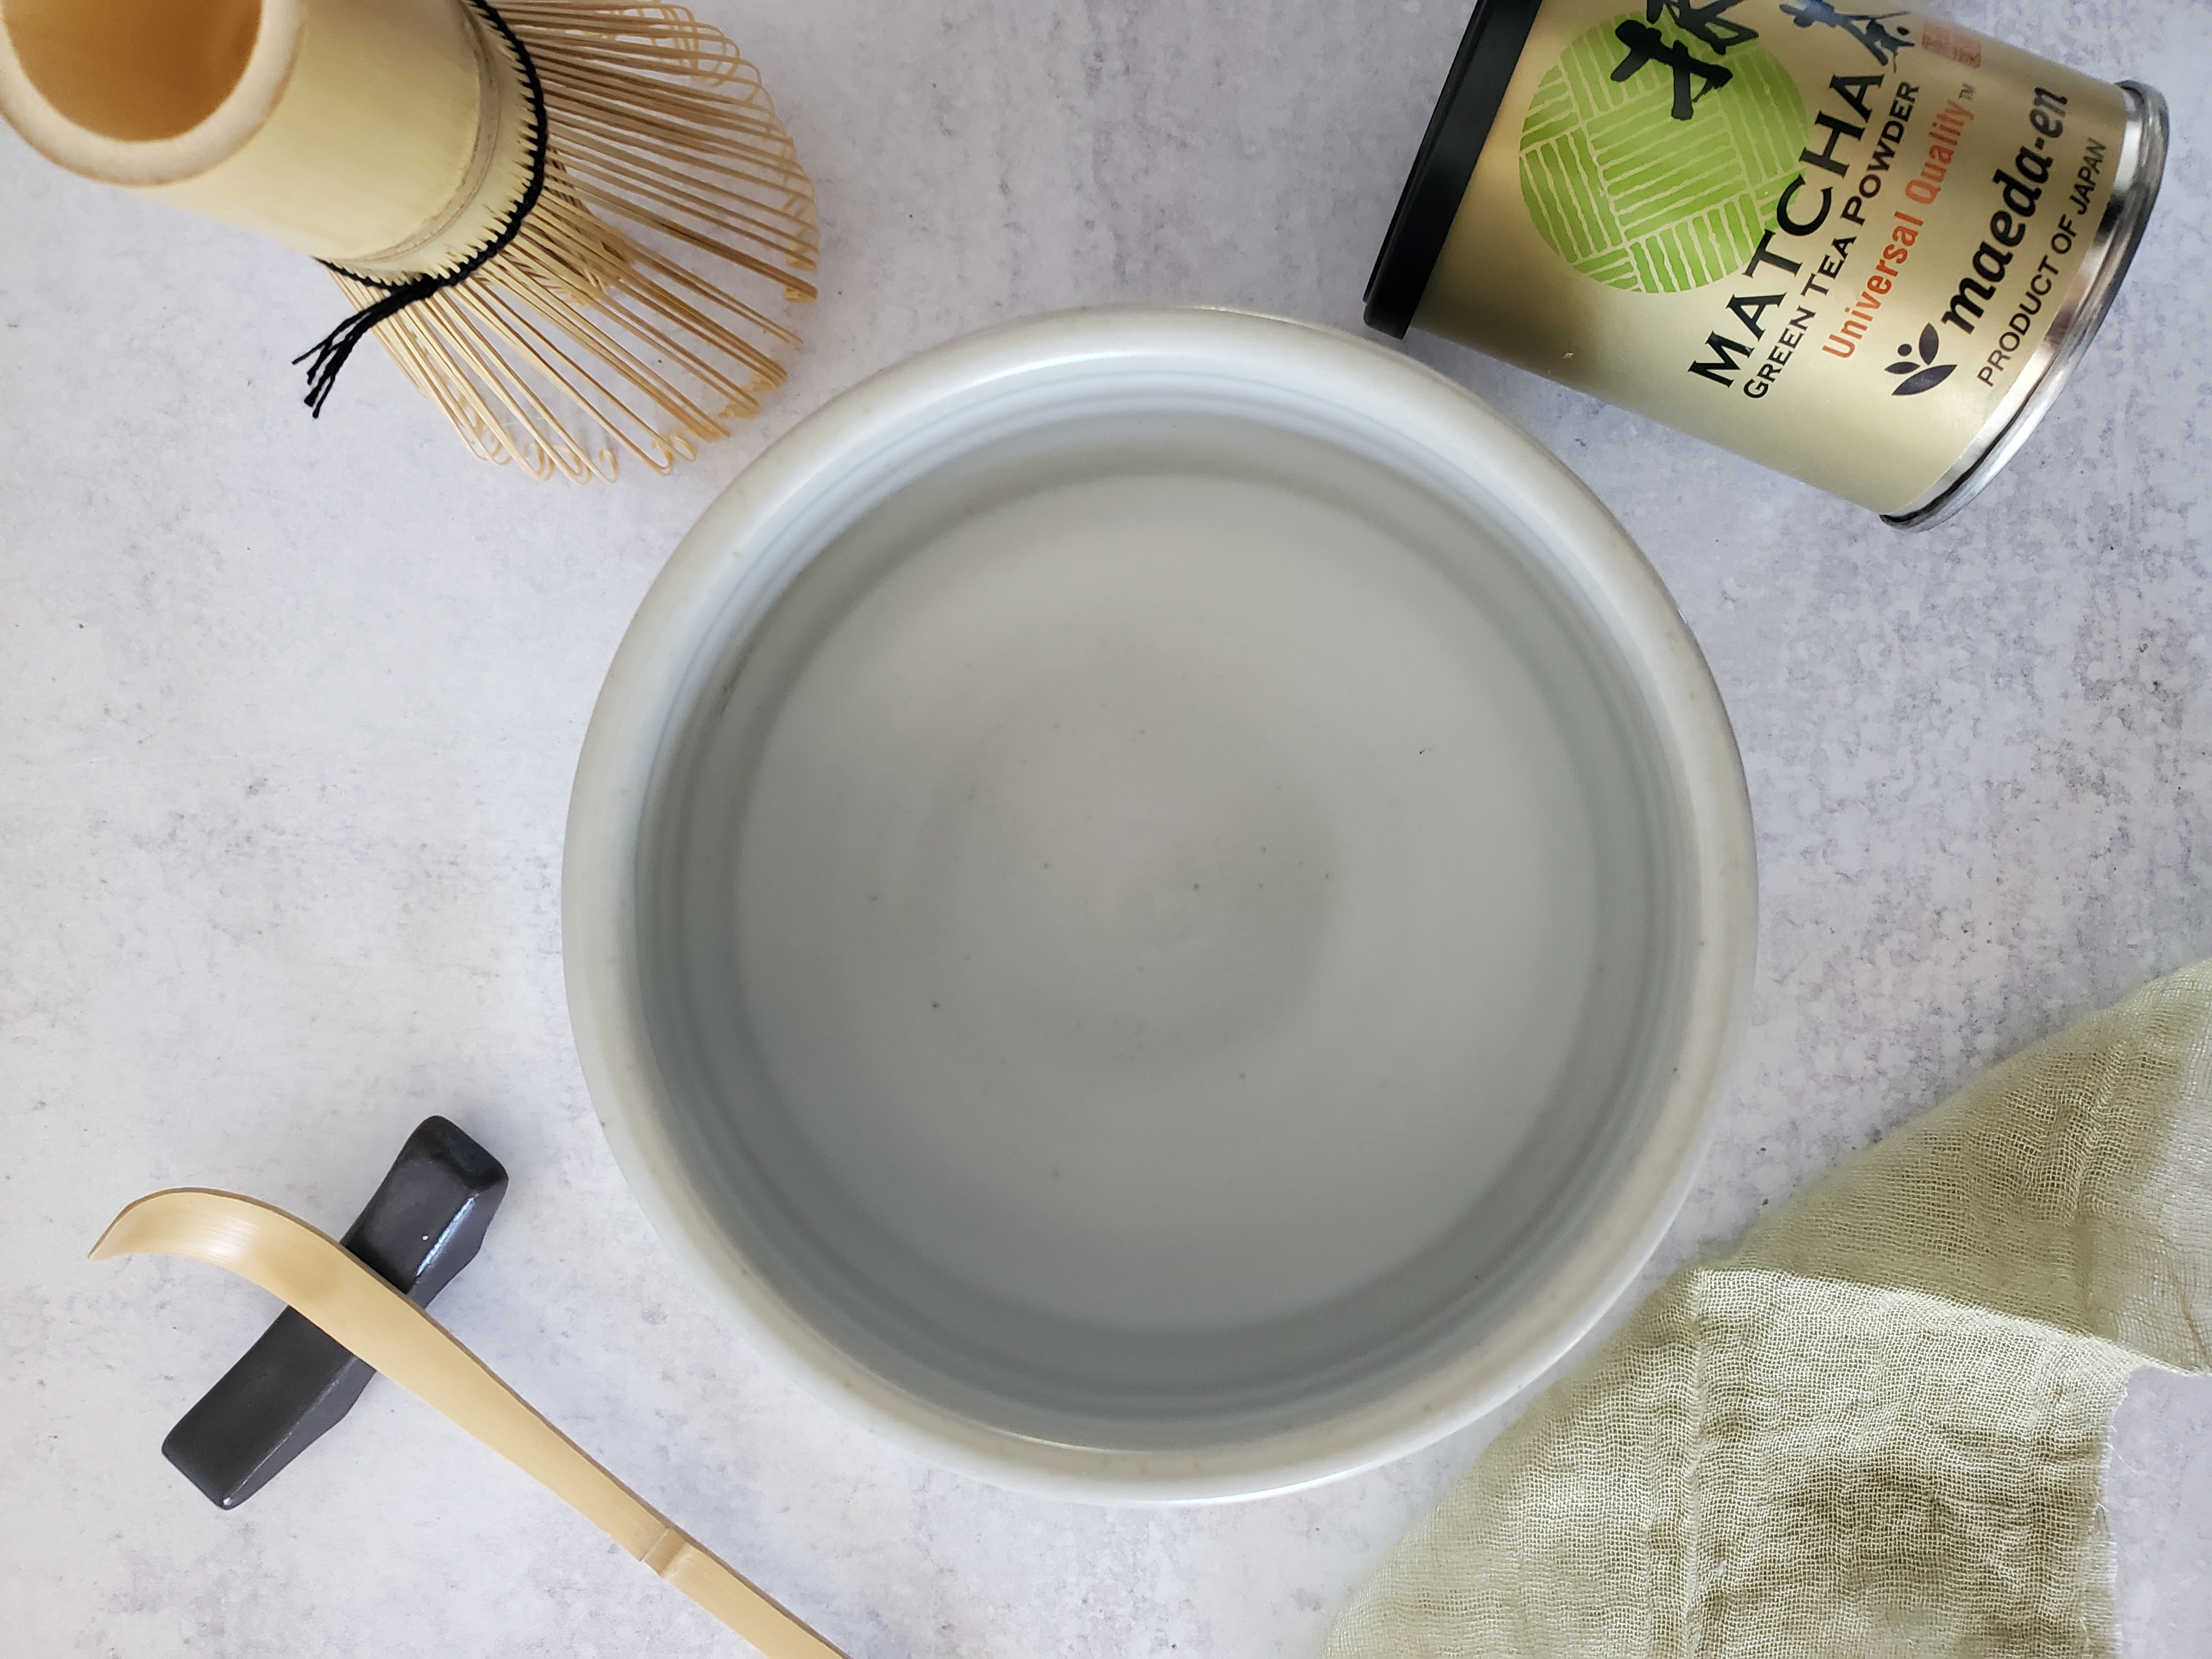 Matcha, whisk, bowl to whisk it in